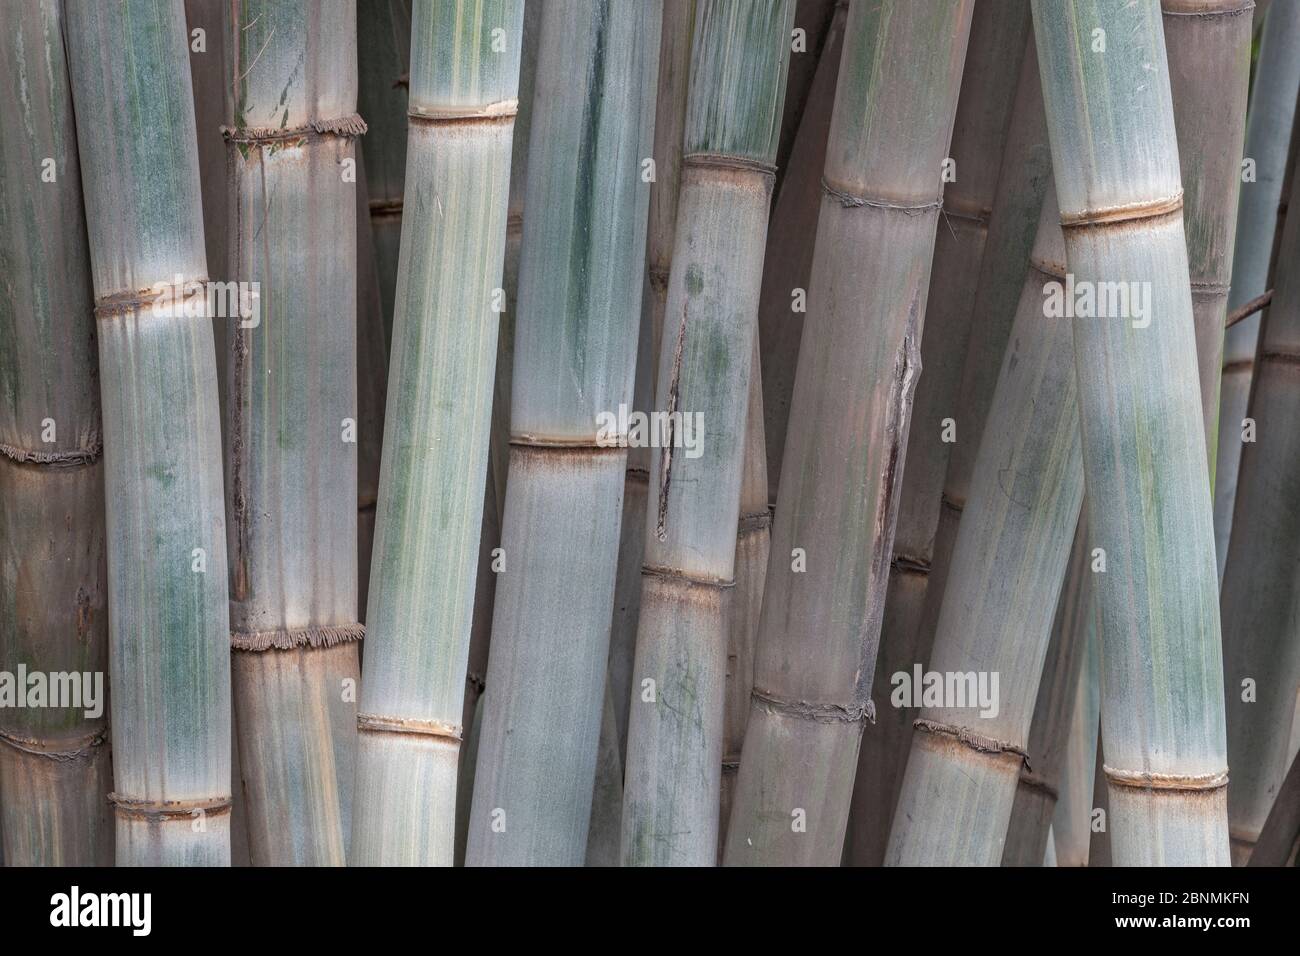 Bamboo (Phyllostachys), stems, Sichuan, China Stock Photo